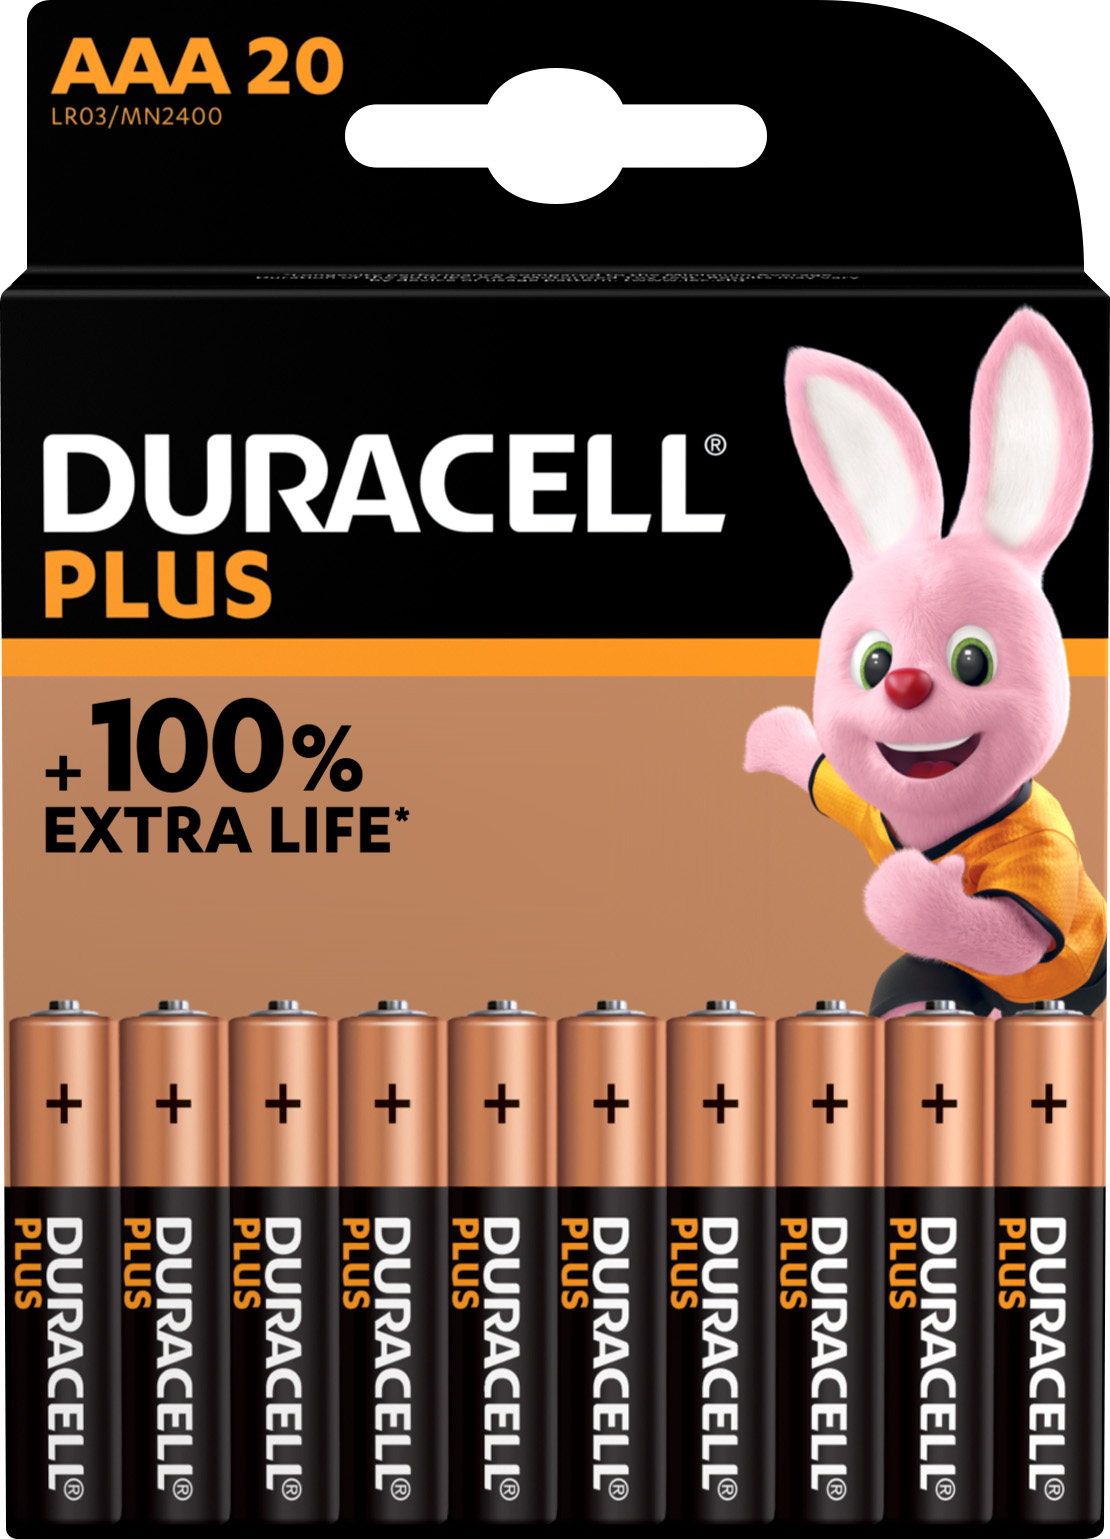 Duracell Batterie Alkaline, Micro, AAA, LR03, 1.5V Plus, Extra Life, Retail Blister (20-Pack)